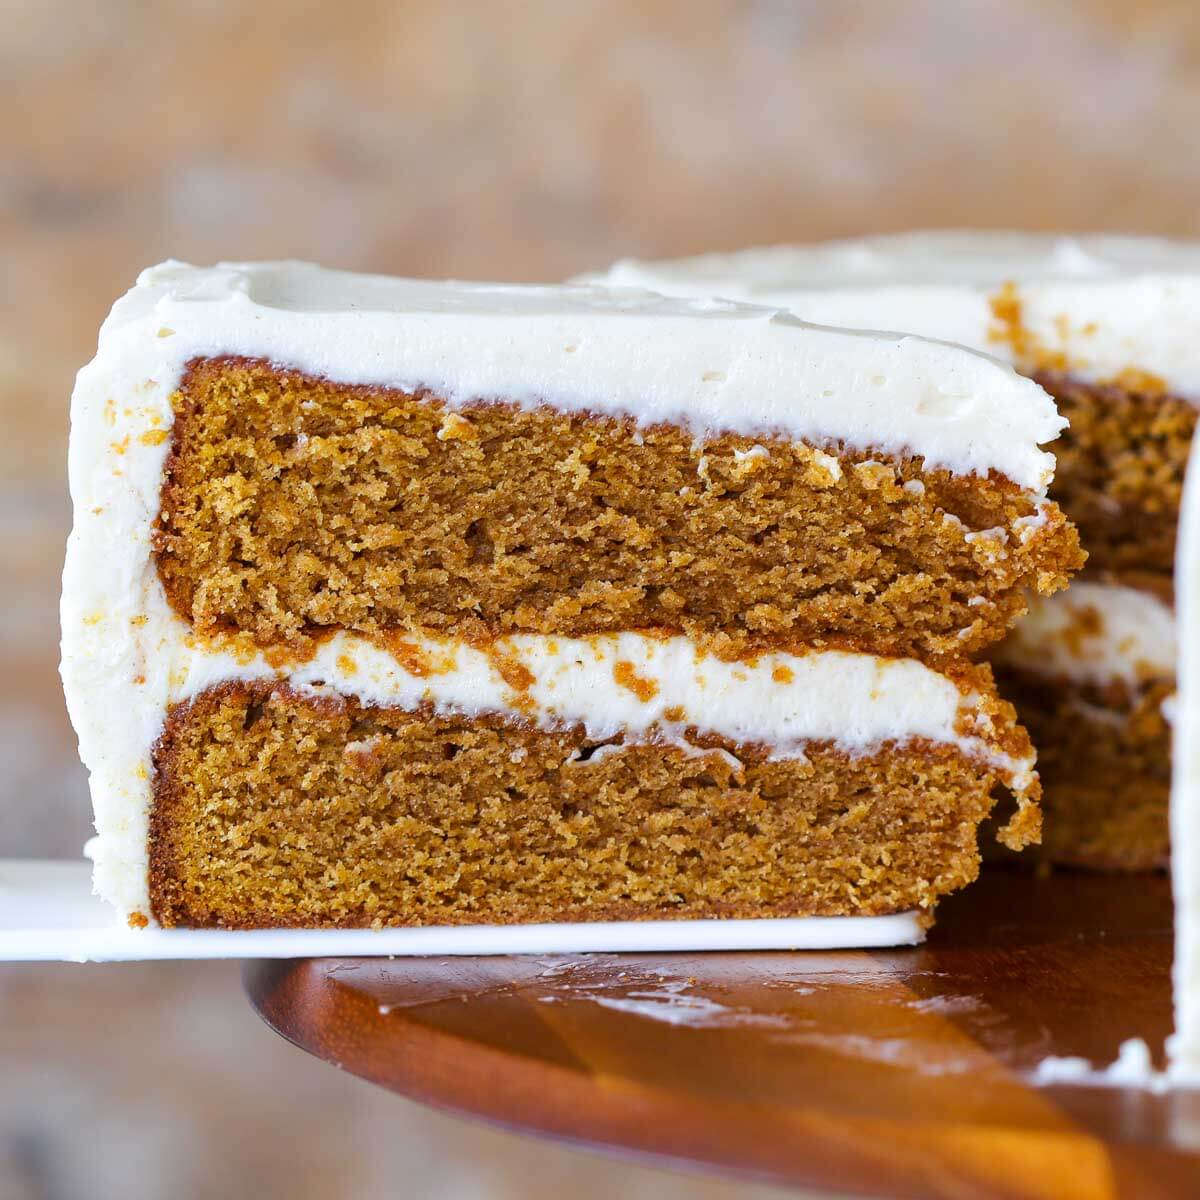 A pumpkin cake being removed from the cake with a white cake server.